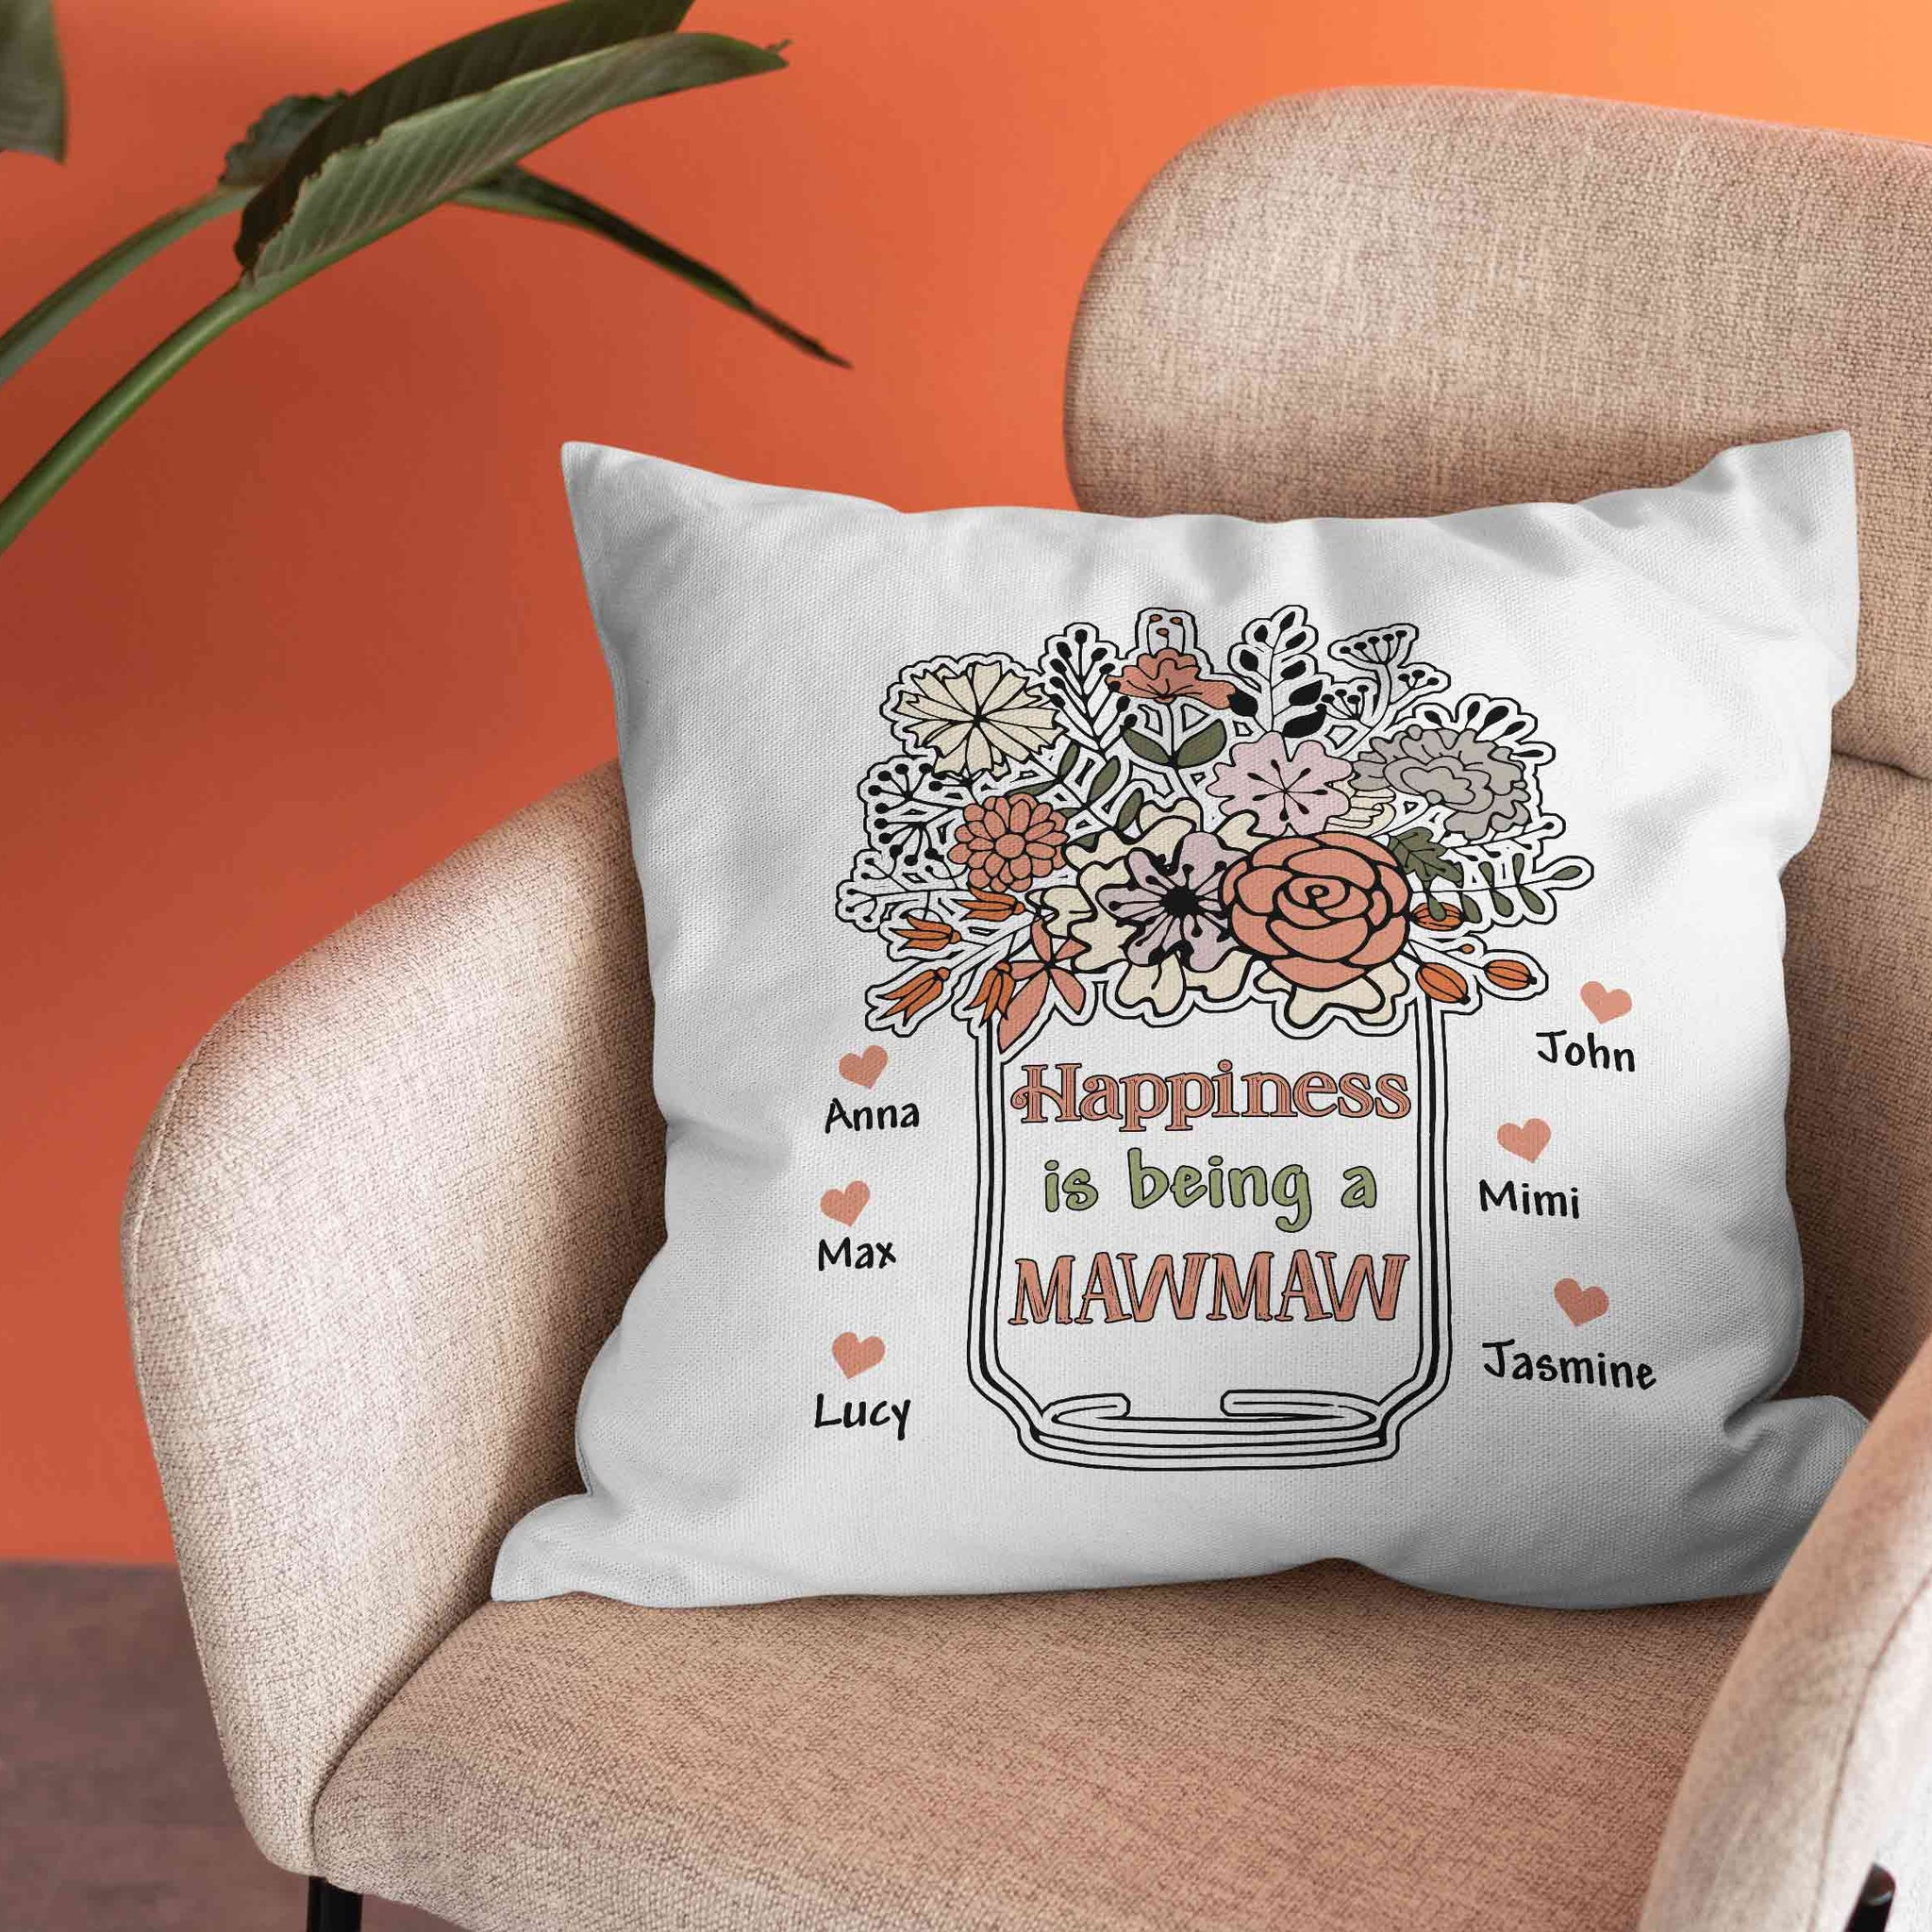 Happiness Is Being a Mawmaw Pillow, Grandma Pillow, Flower Pillow, New Grandma Gift, Gift for Grandma, Baby Birth Announcement Pillow